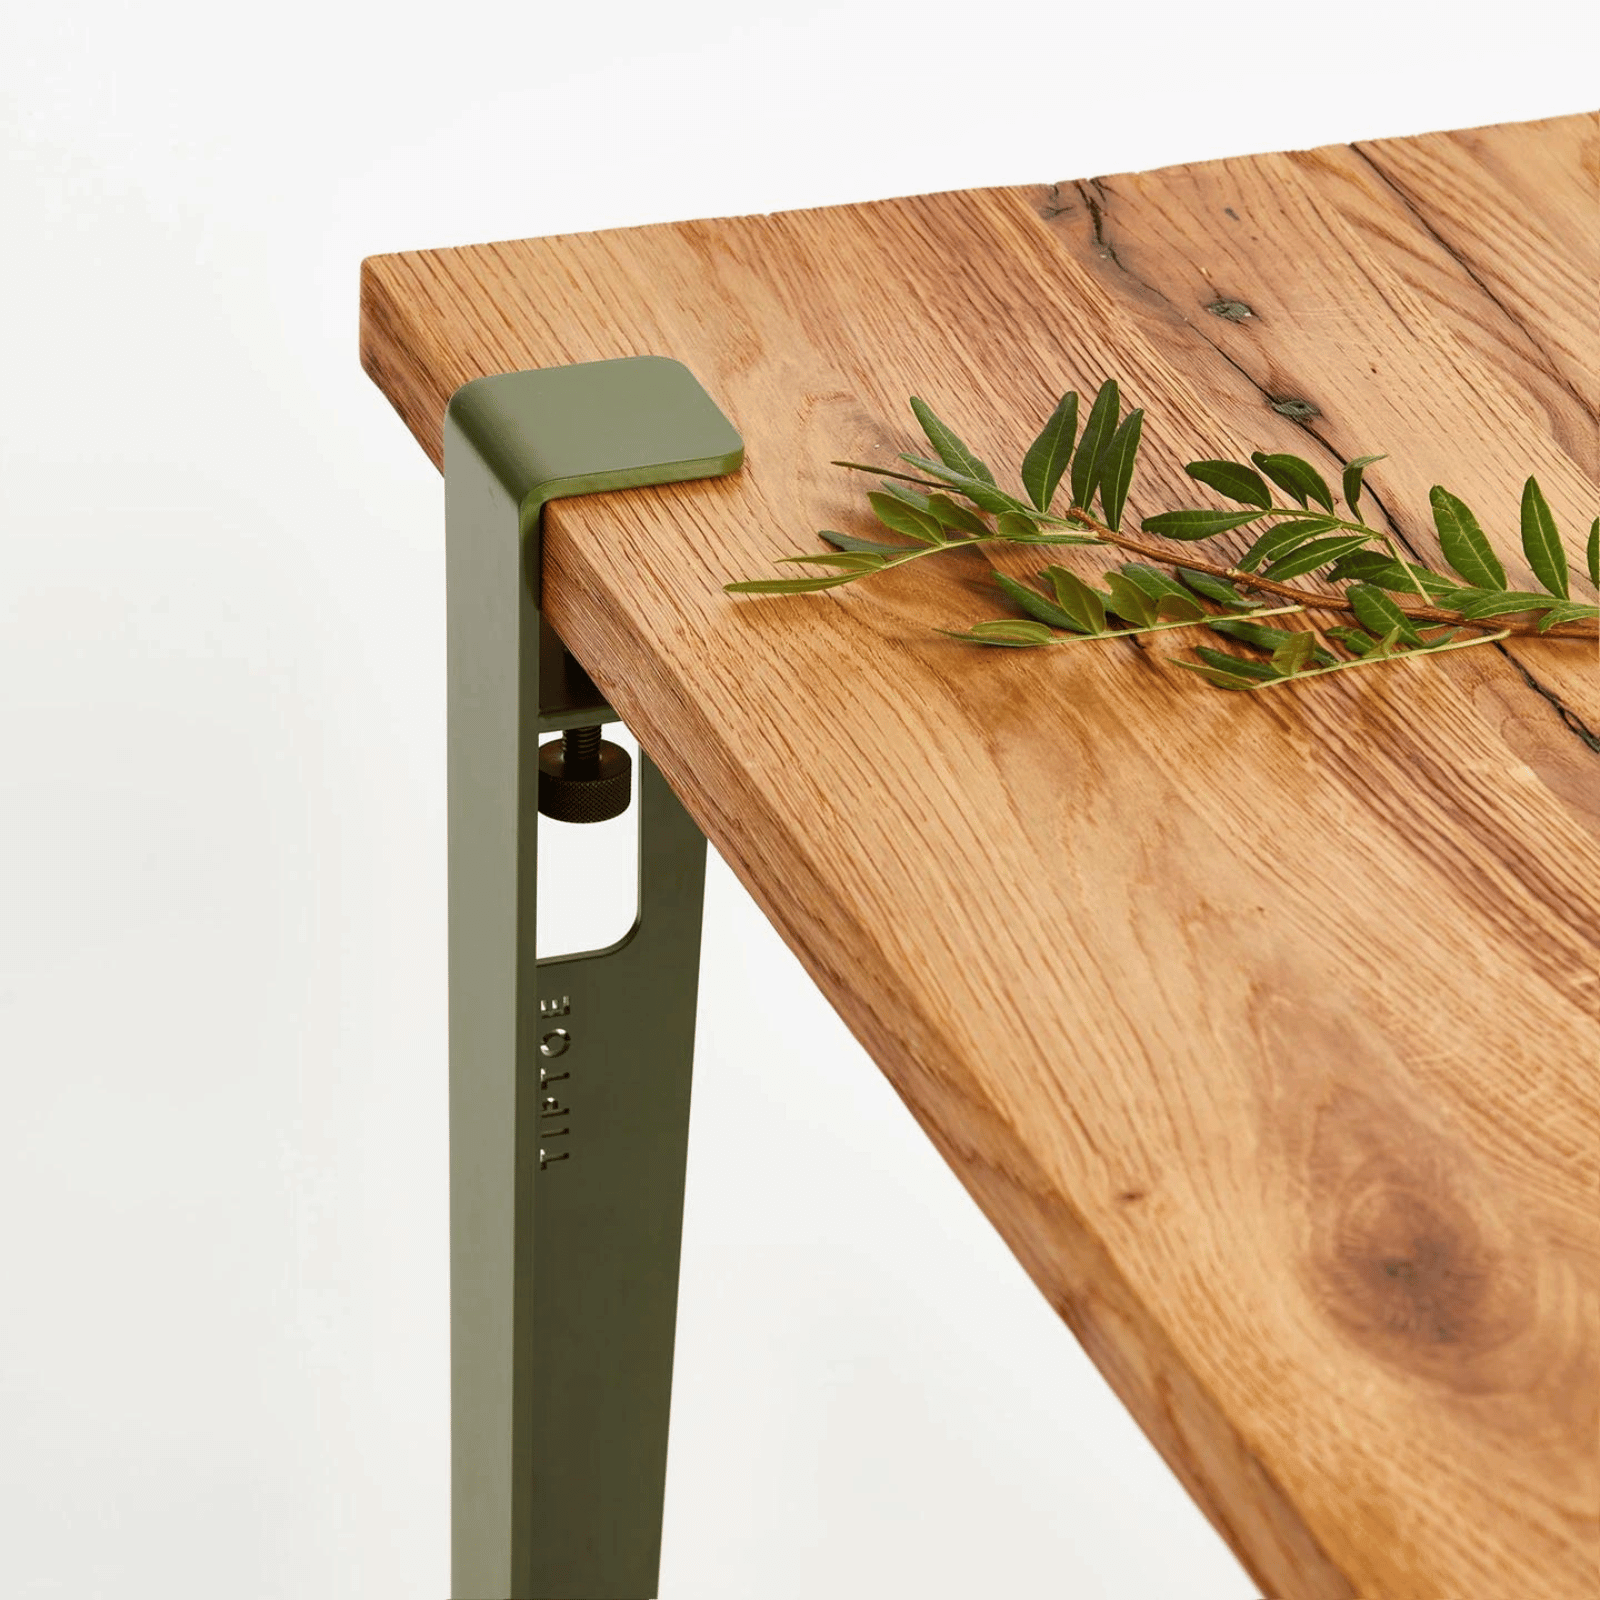 Tiptoe Noma Desk Reclaimed Oak Rosemary Green Drawers Not Required Green Designer Furniture From Holloways Of Ludlow